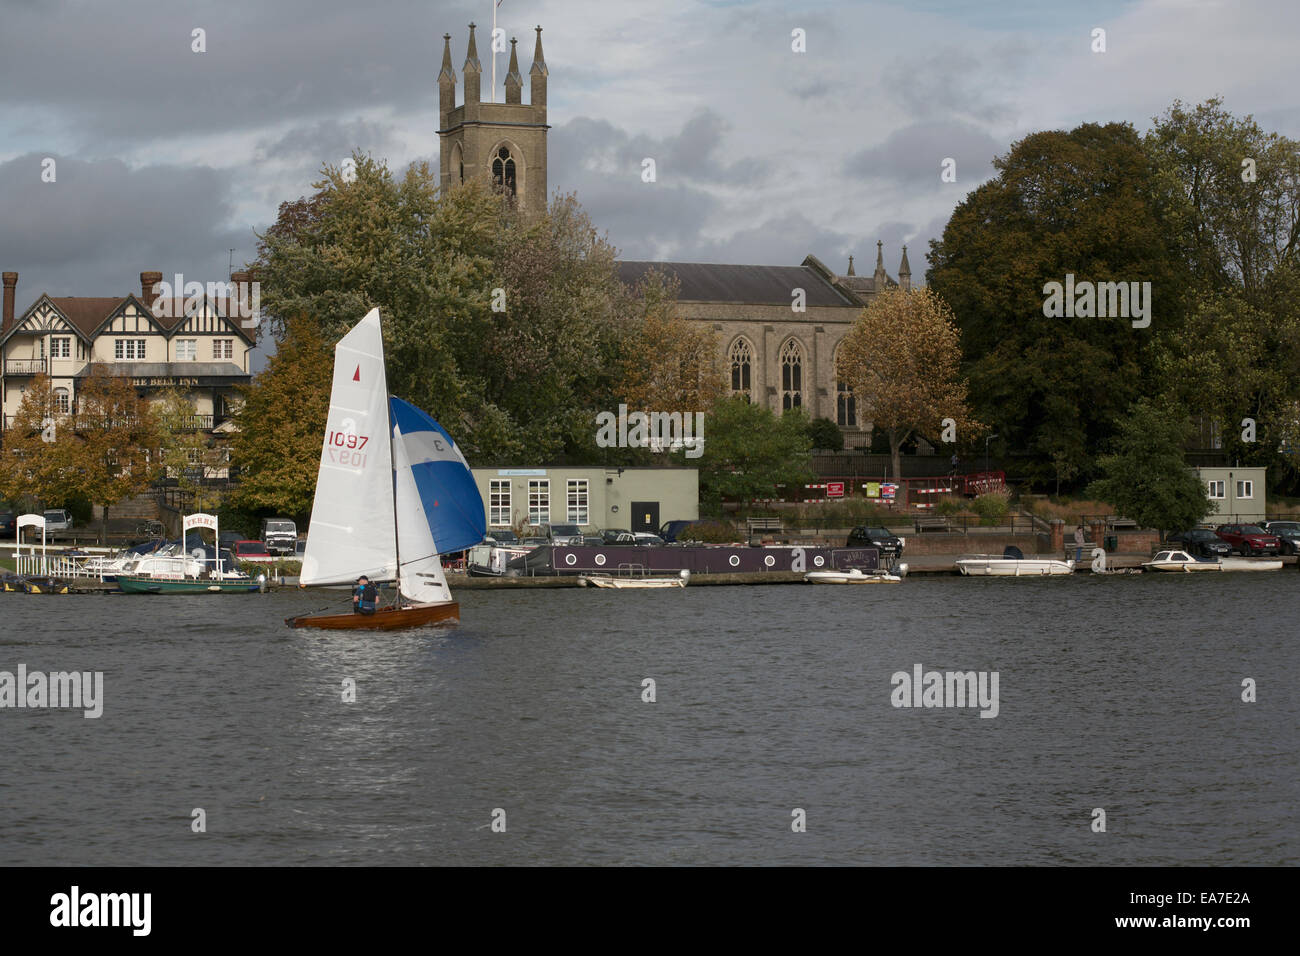 River Thames with Merlin Rocket sailing dinghy St Mary's church spire Hampton Stock Photo